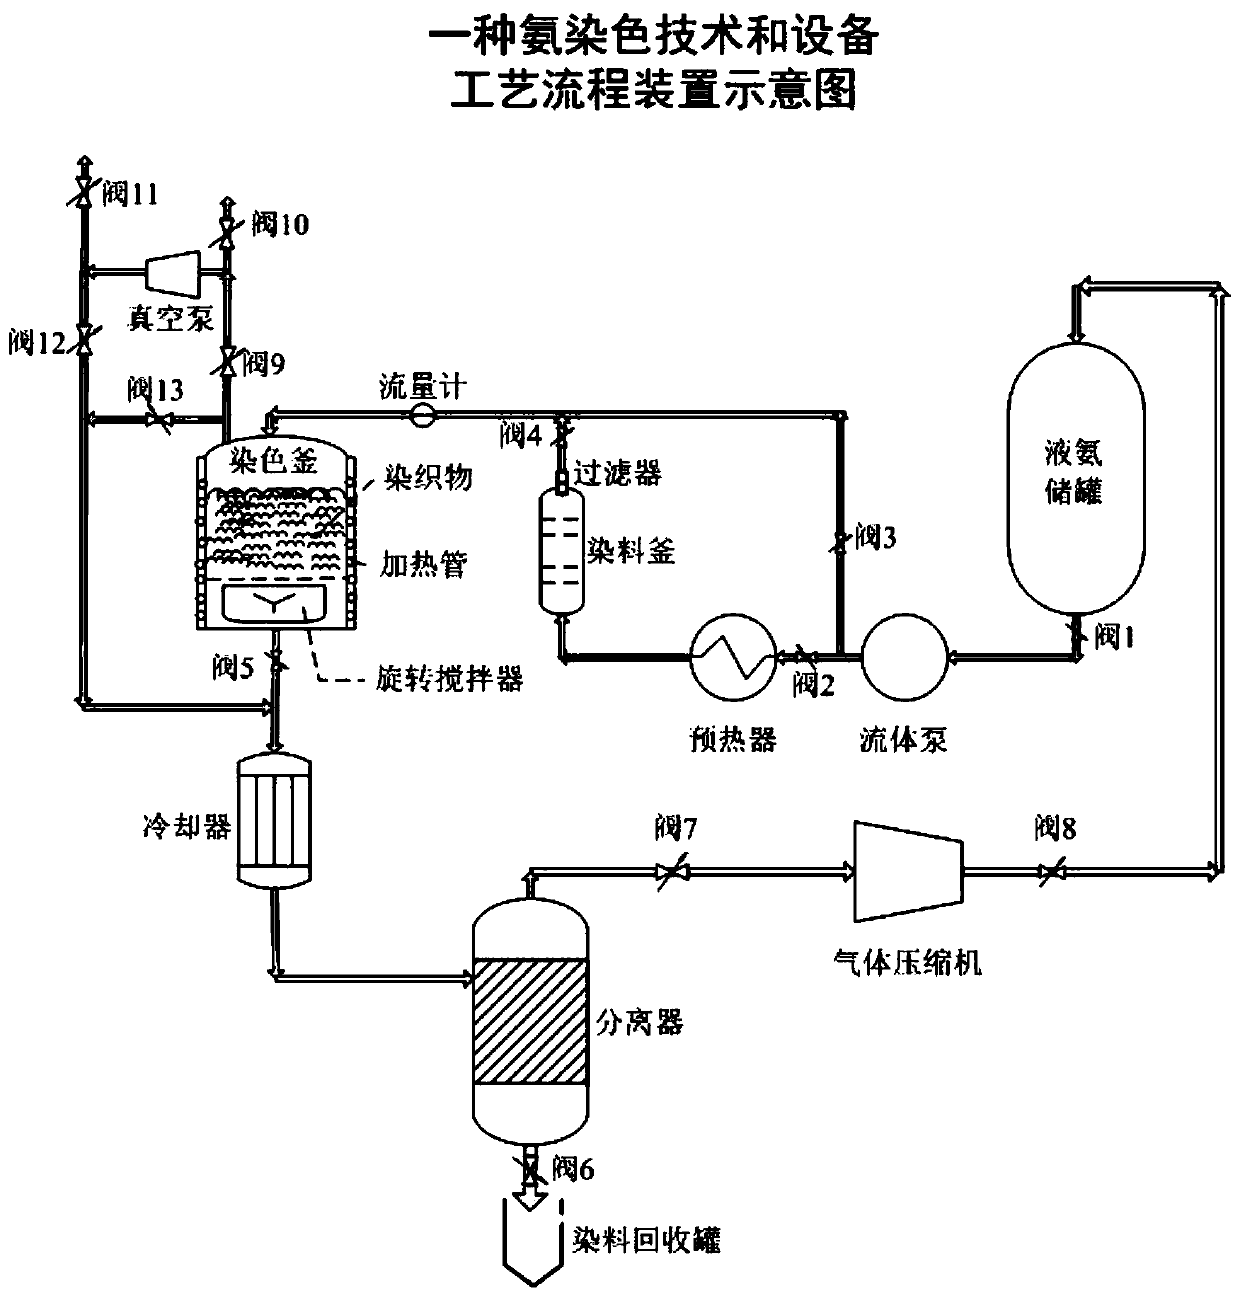 Ammonia dyeing technology and equipment